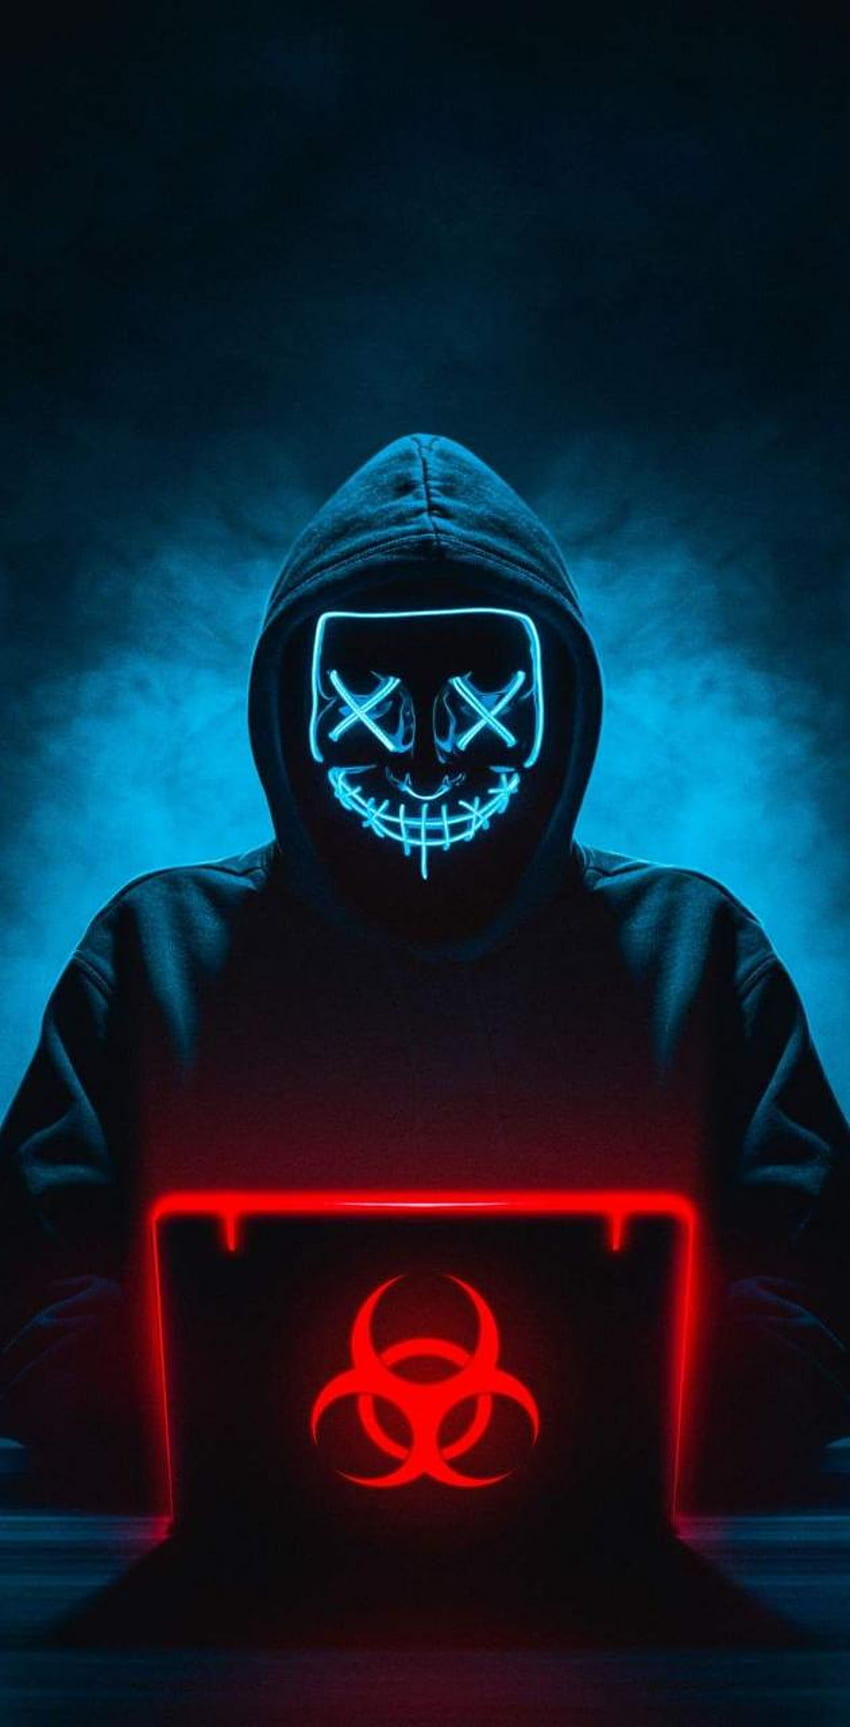 Neon purge by CFT007 - on ZEDGEâ HD phone wallpaper